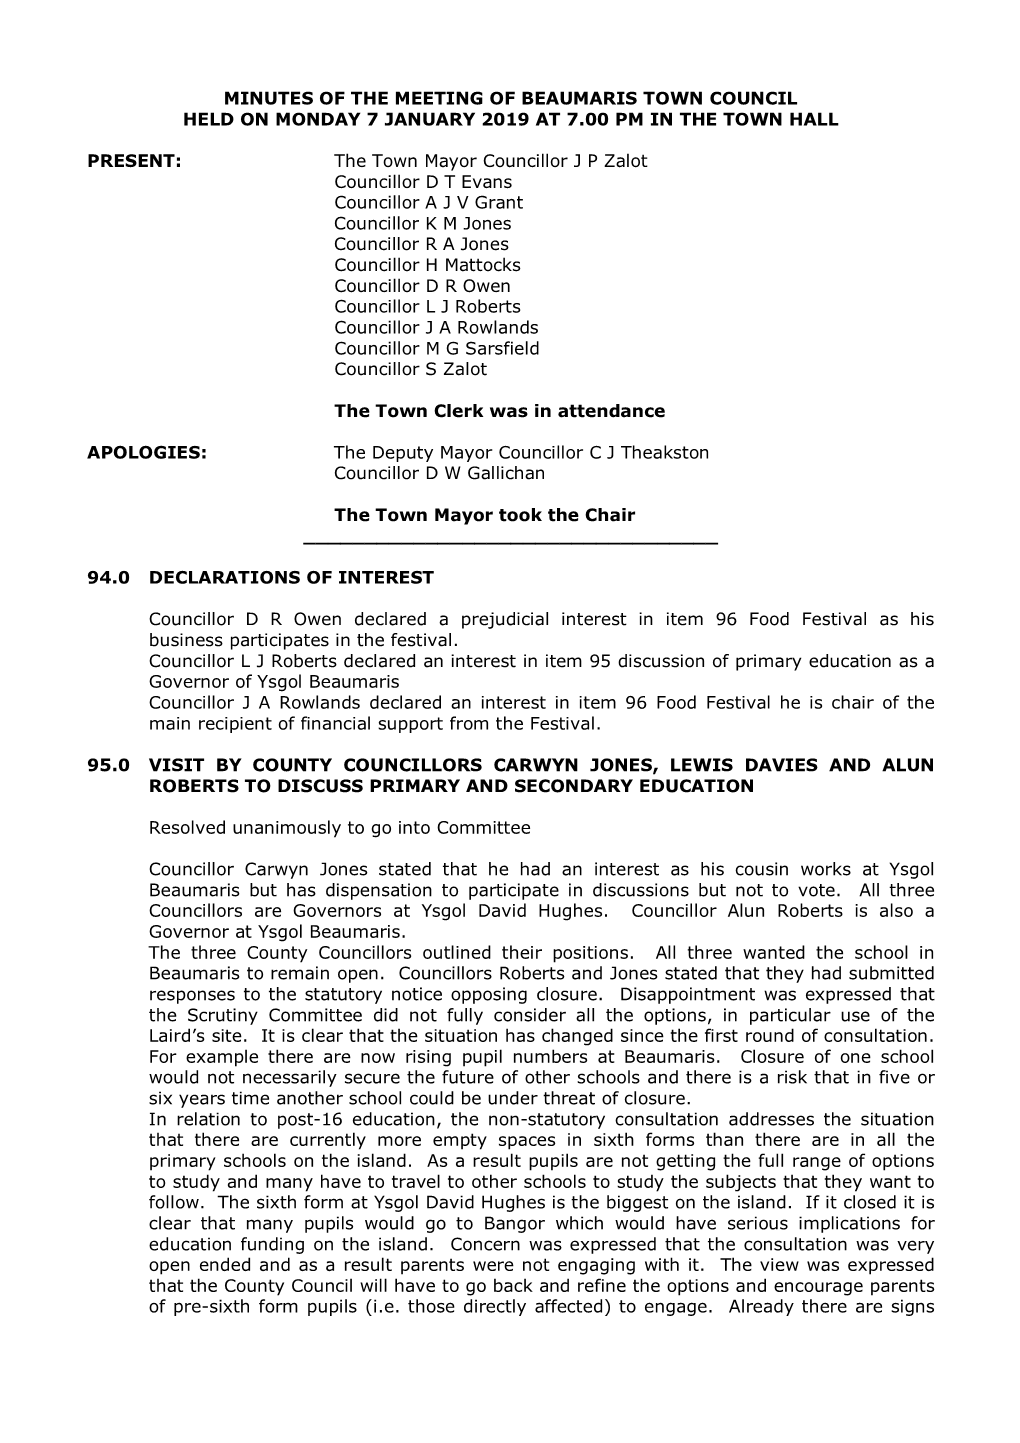 Minutes of the Meeting of Beaumaris Town Council Held on Monday 7 January 2019 at 7.00 Pm in the Town Hall